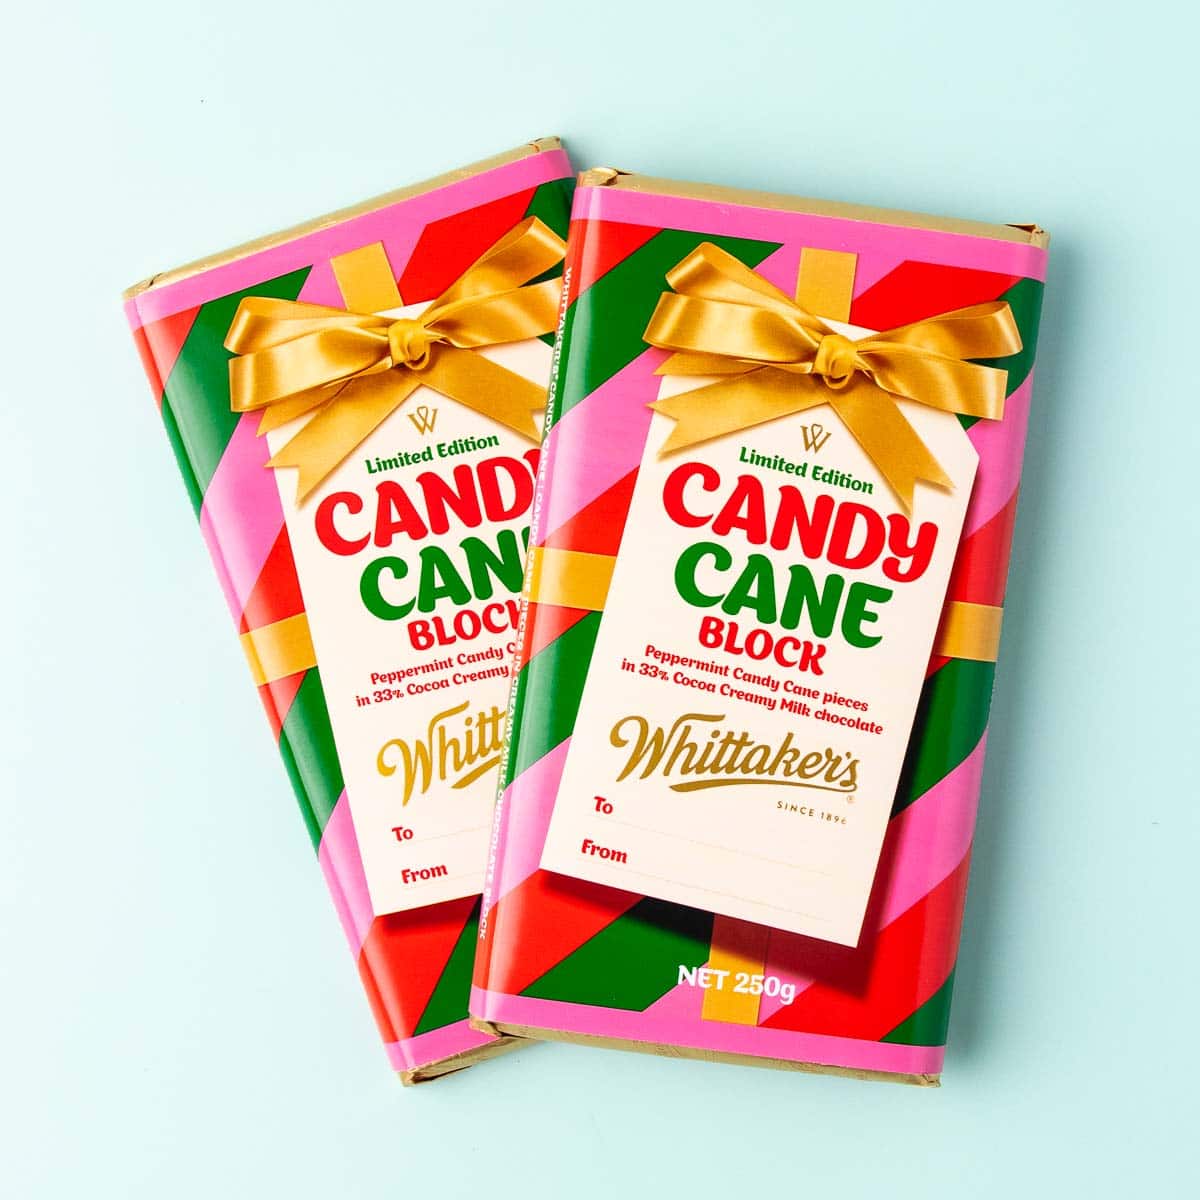 Two blocks of Whittakers Candy Cane 250g chocolate blocks in their festive wrappers, on a mint green background. 